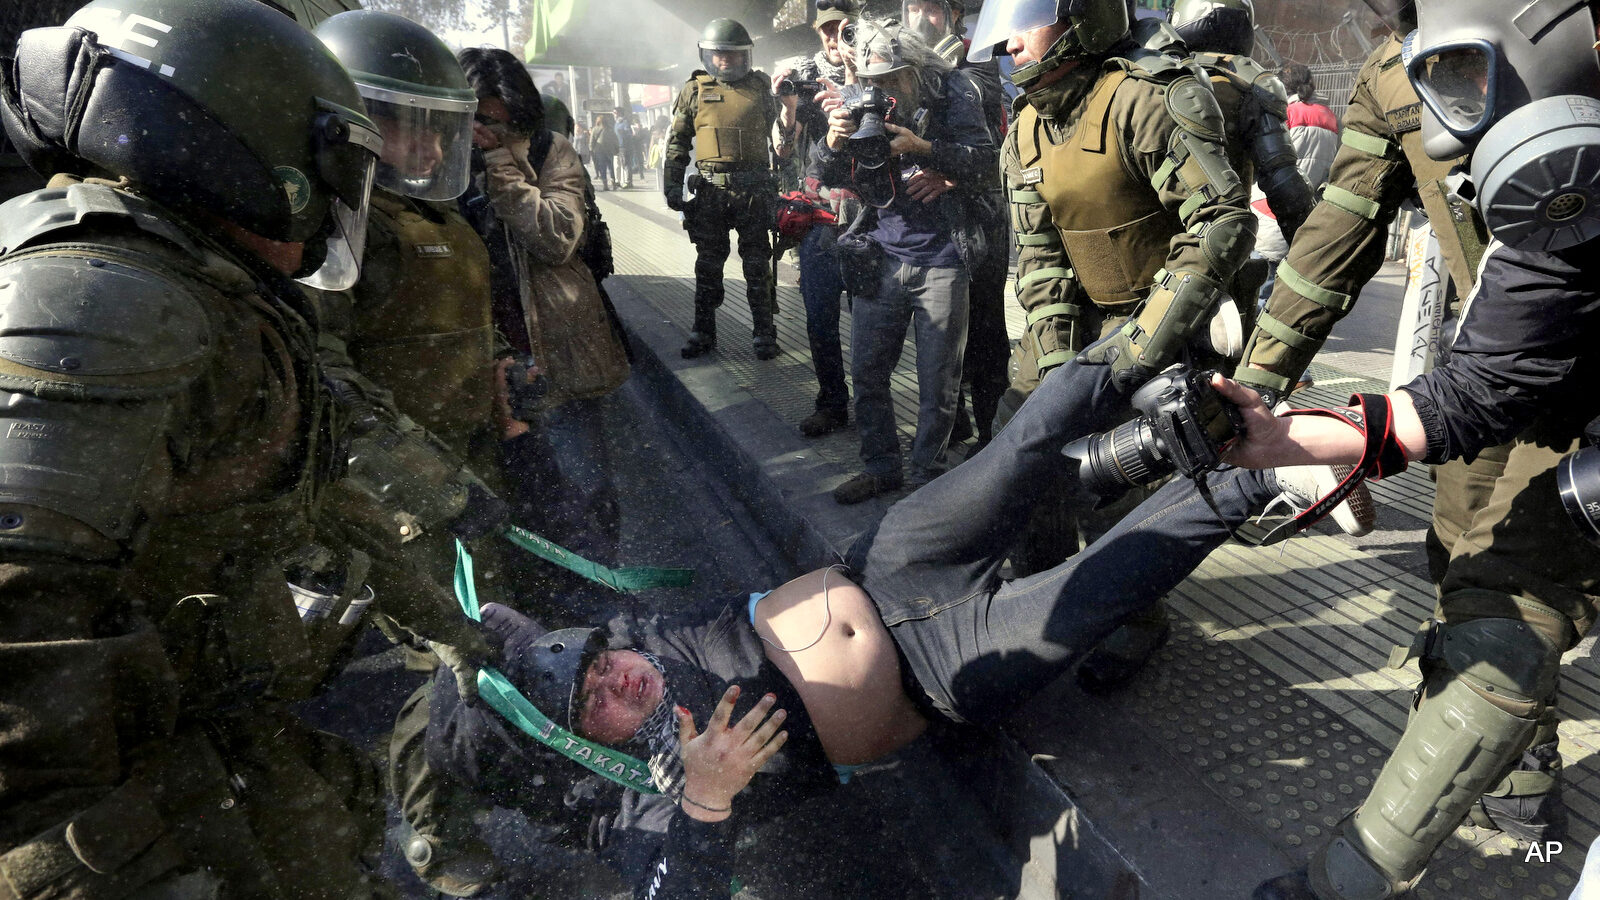 A protester is detained by riot police at the end of a march in Santiago, Chile